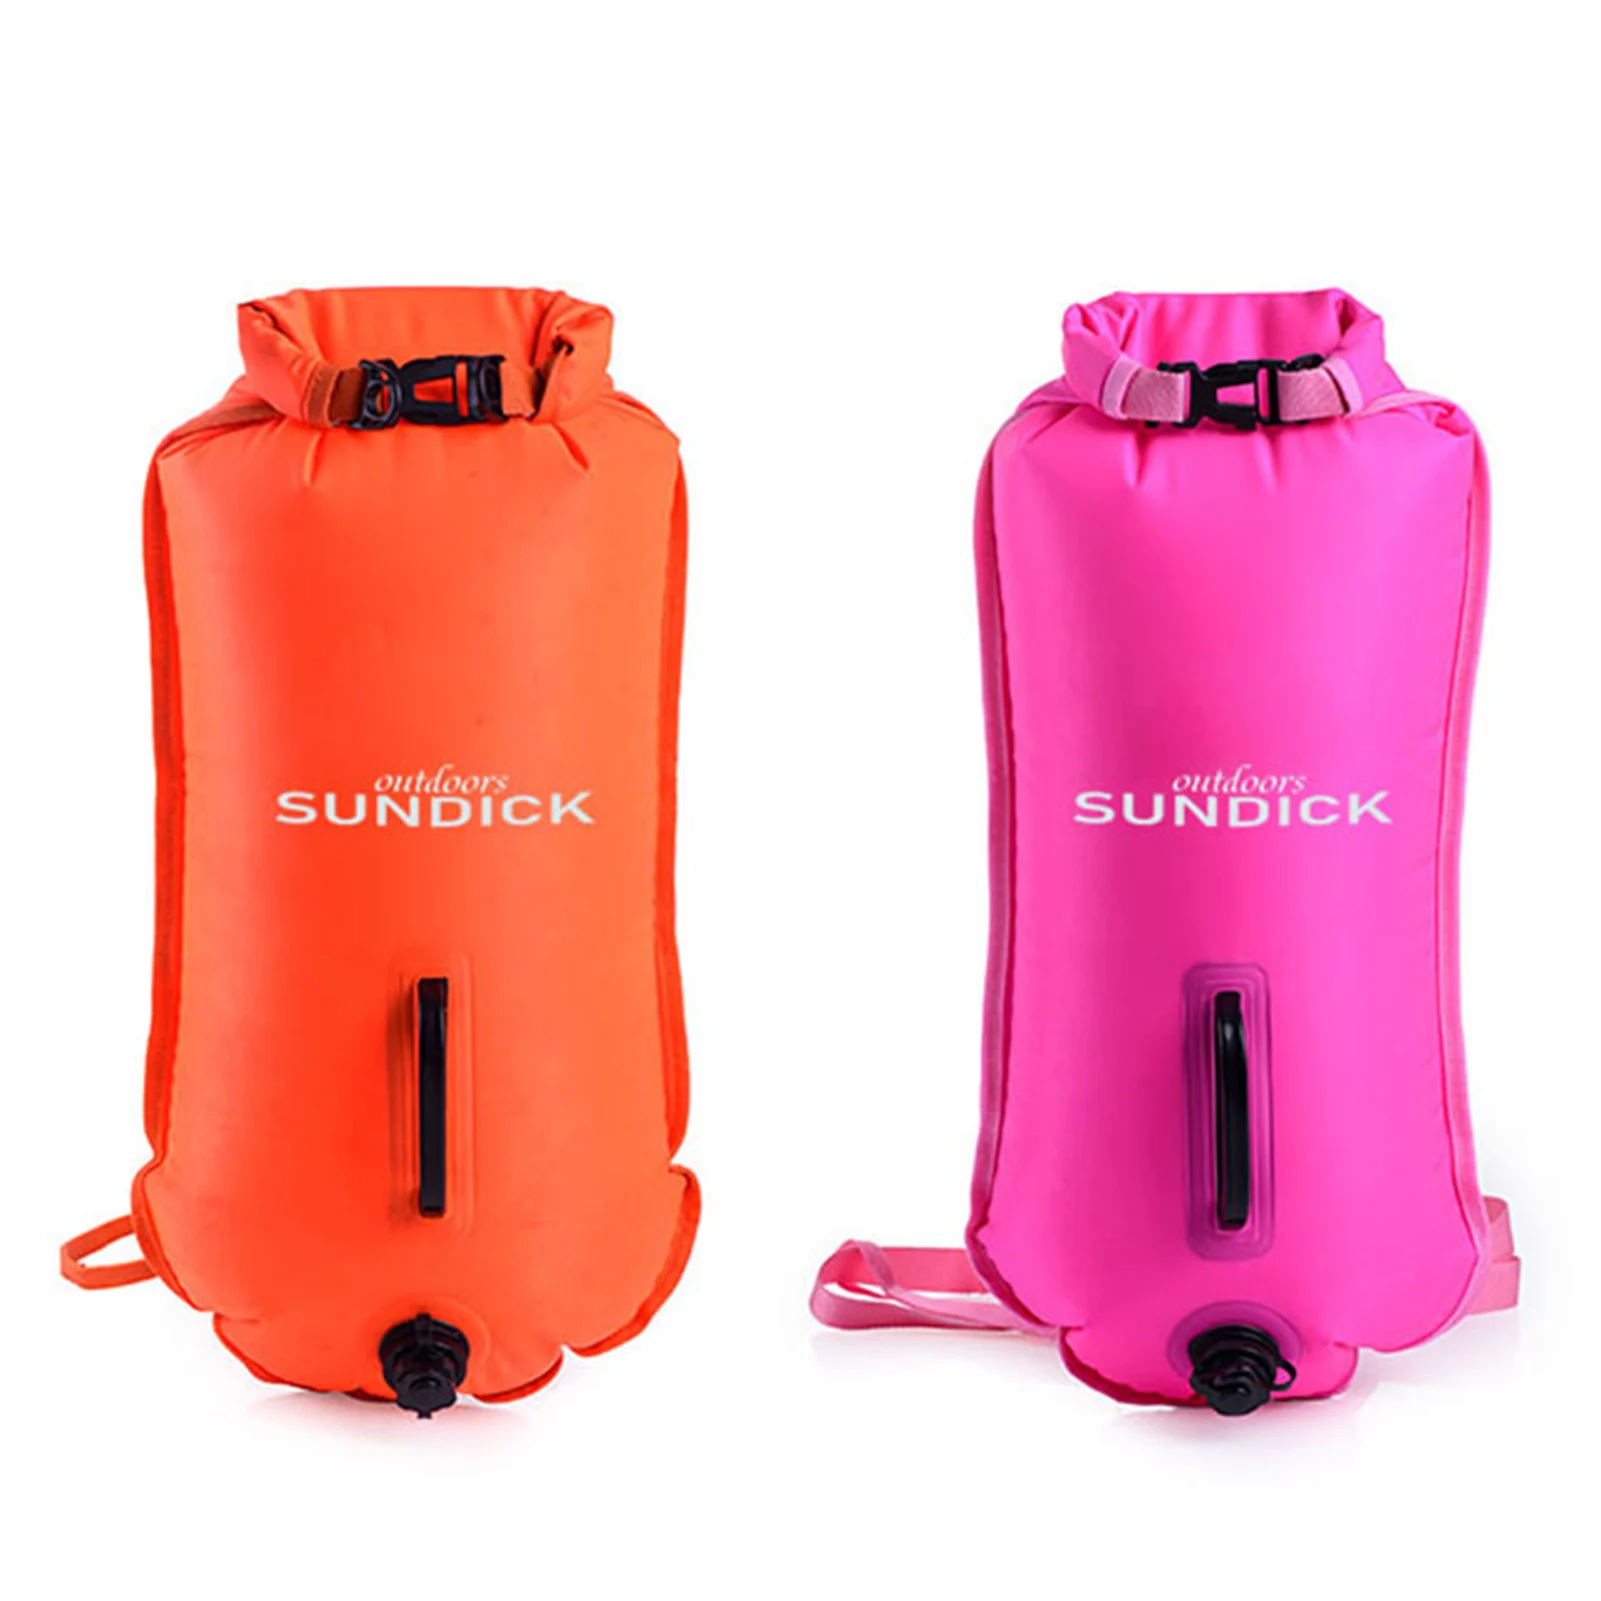 

Swimming Buoy Three-layer Double-airbag Swim Buoy 28L Waterproof Dry Drift Bag Drifting Rafting Drybag For Swimming Accessories